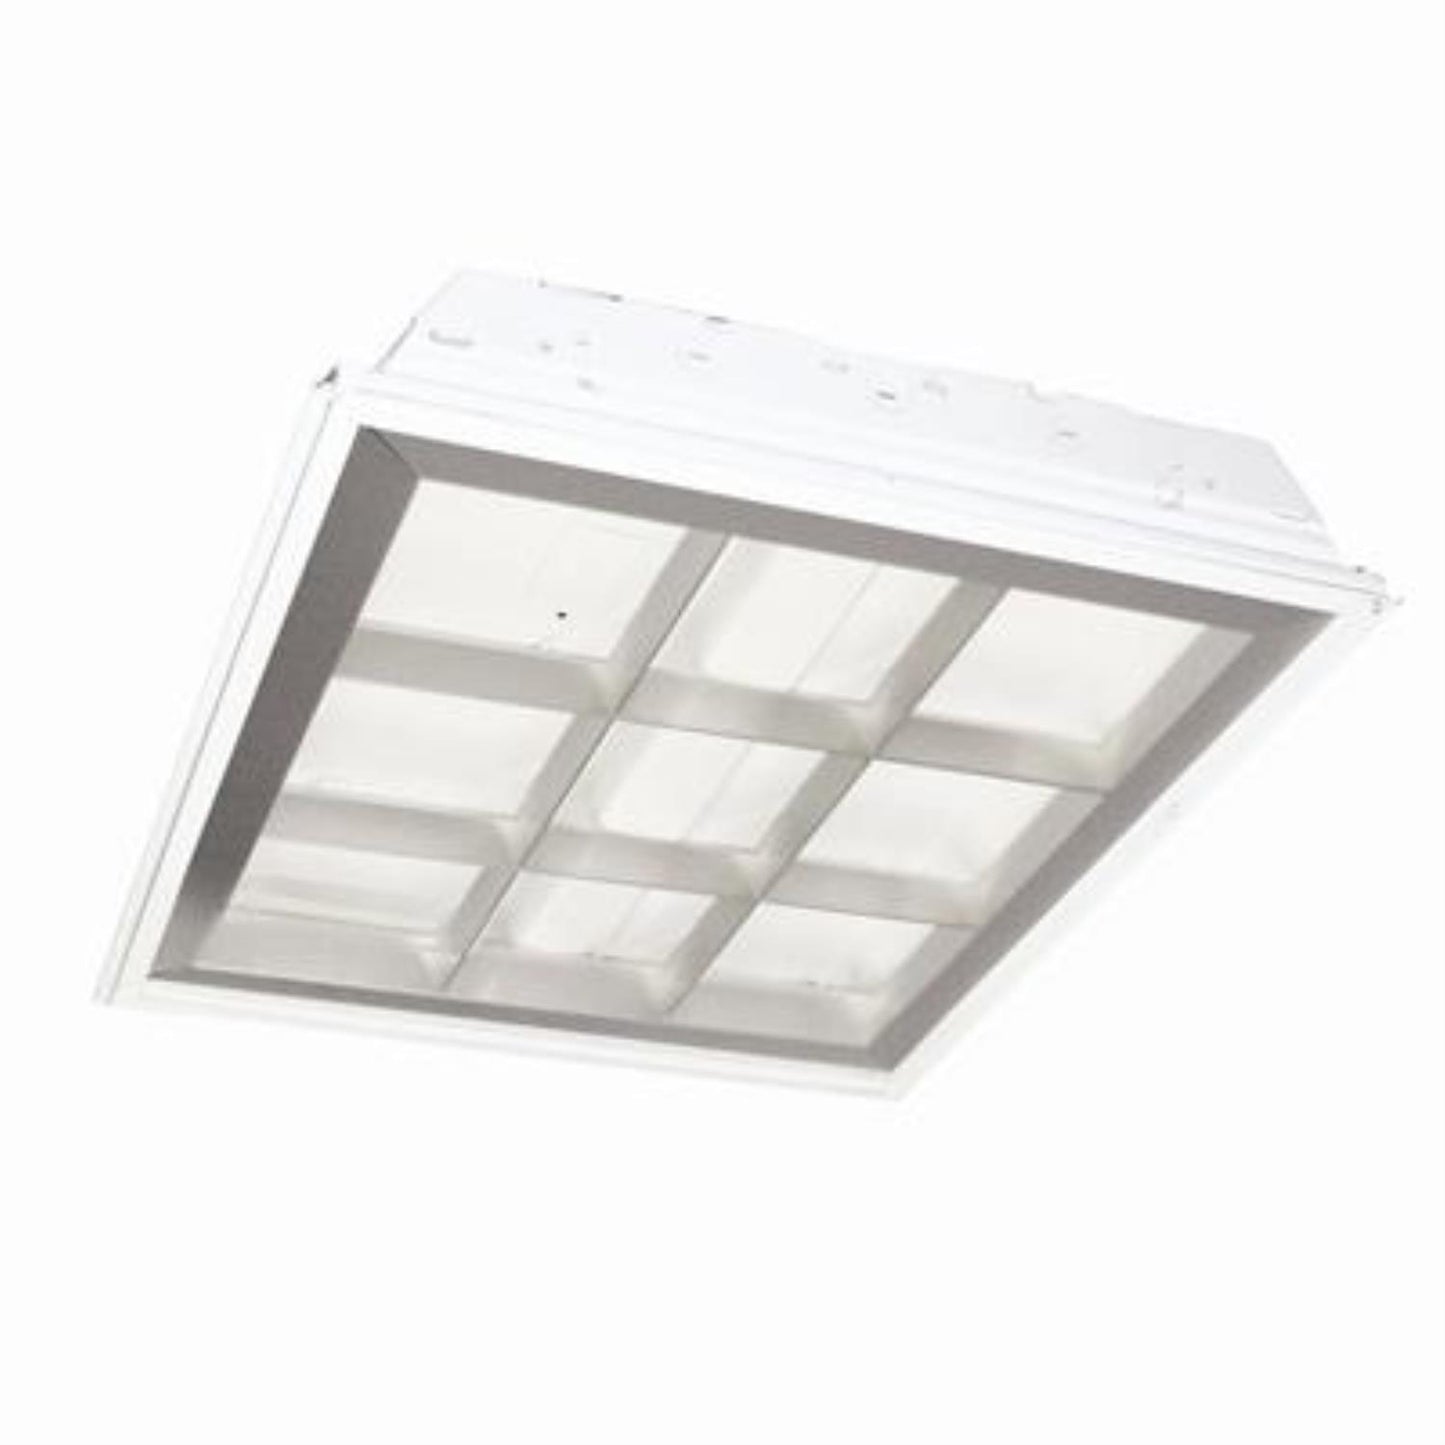 2X2 Recessed Lay-In, 120V